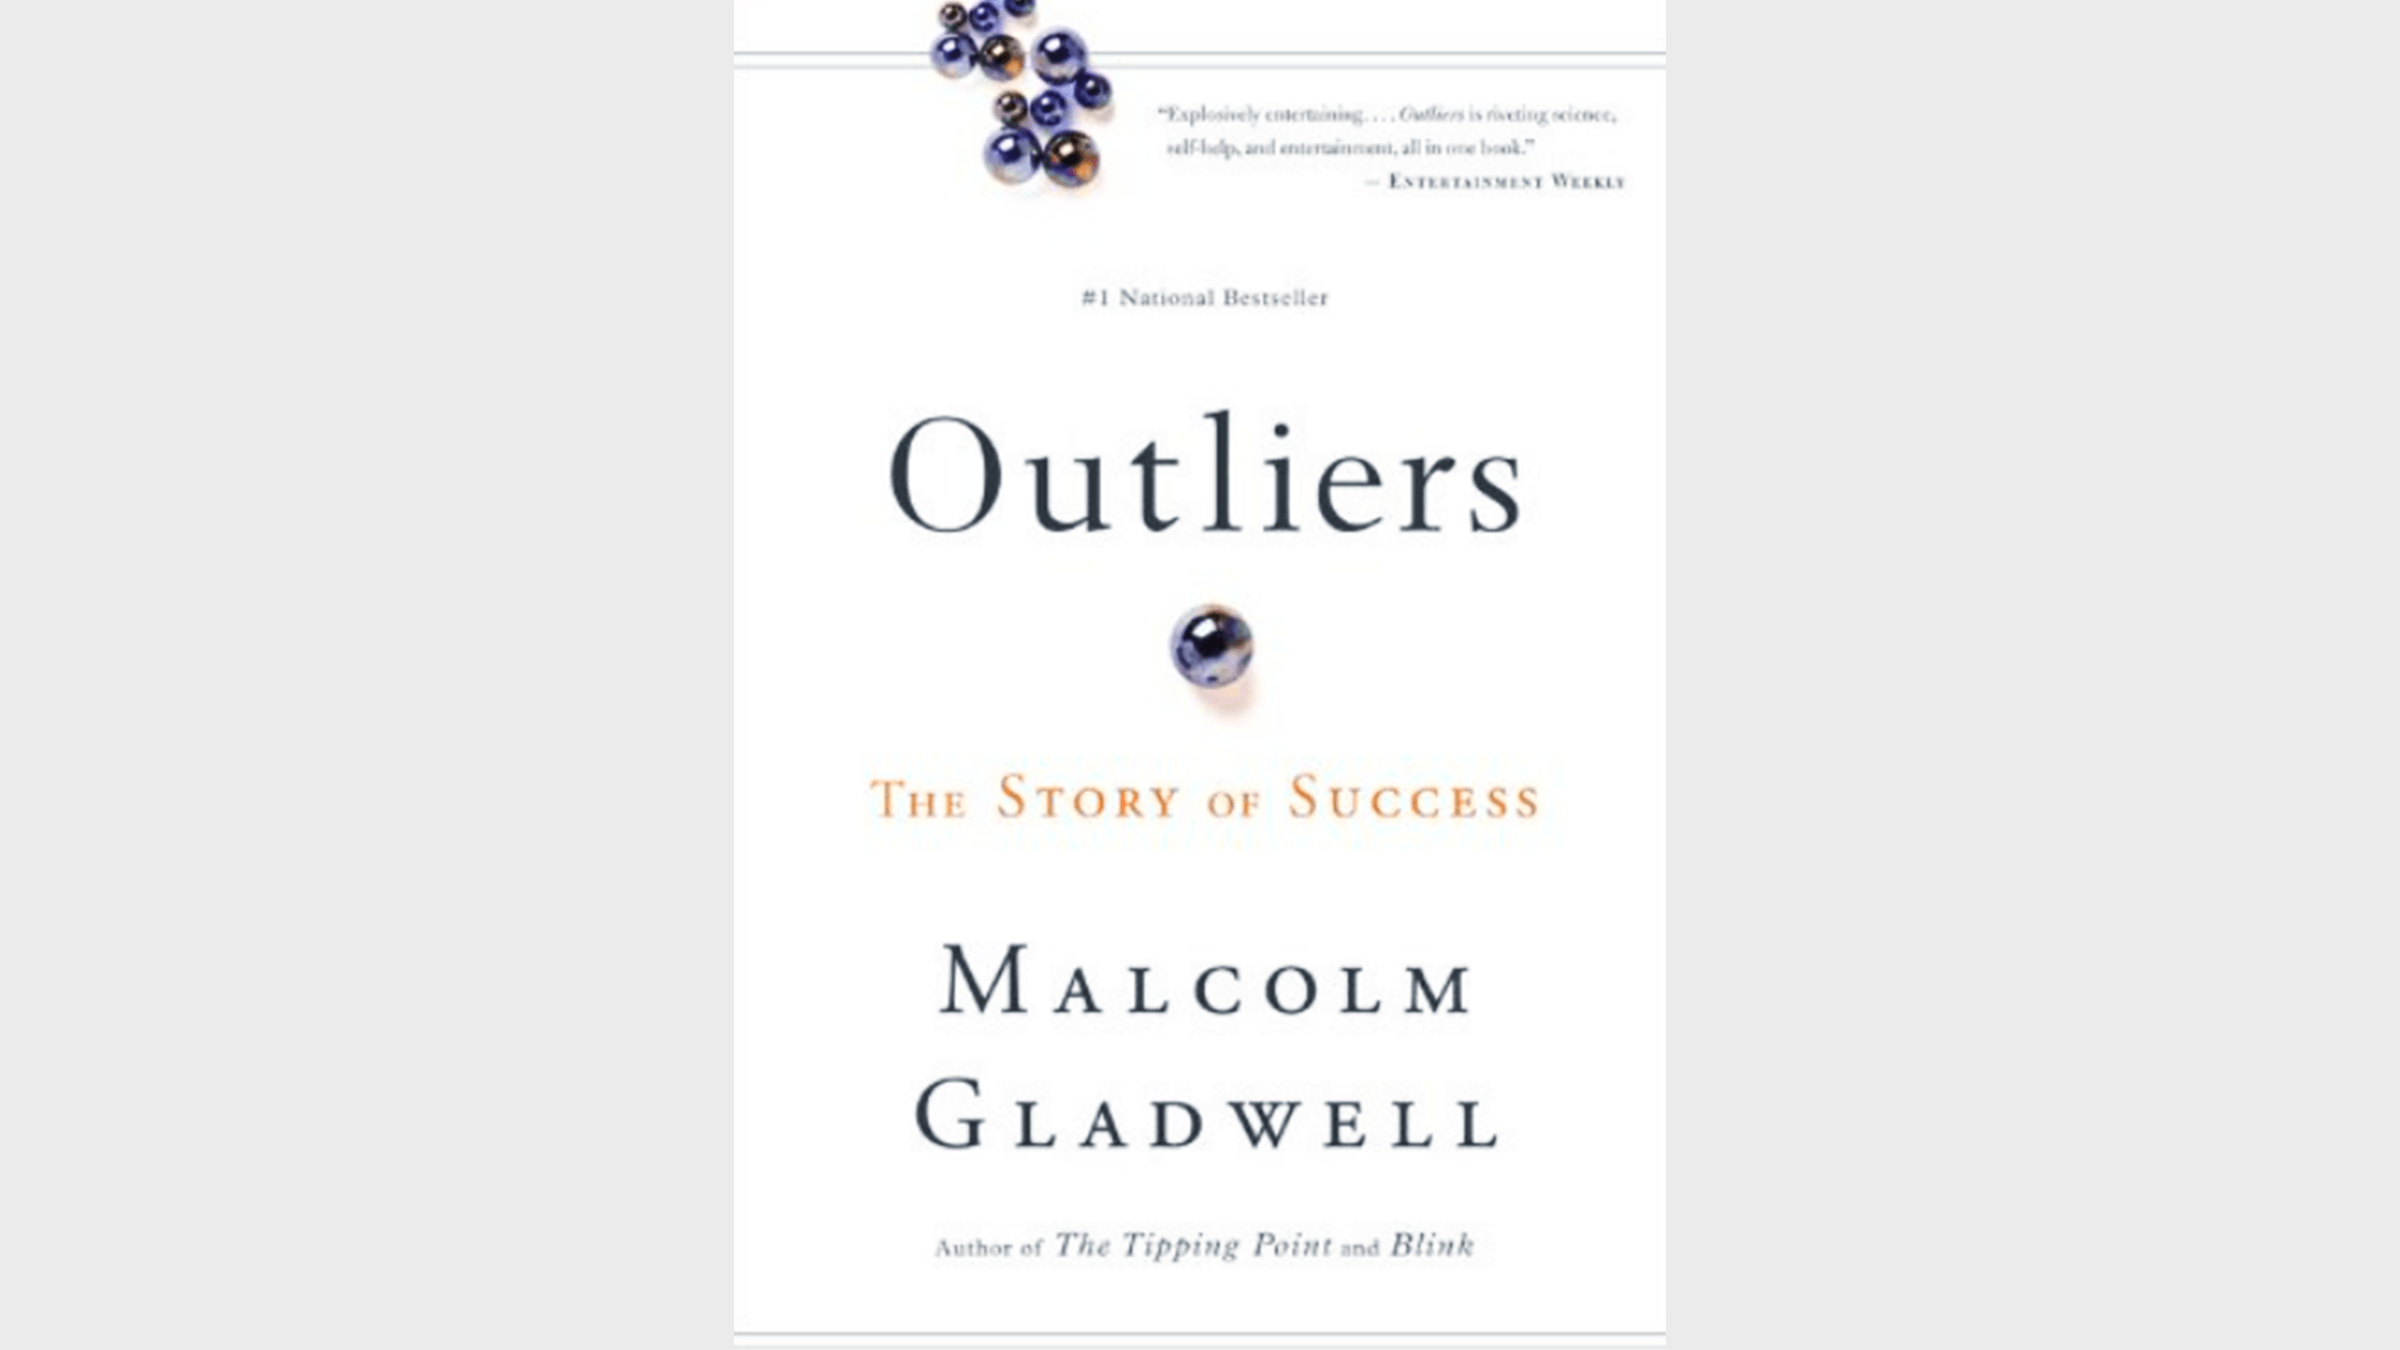 The cover of the book 'Outliers' by Malcolm Gladwell